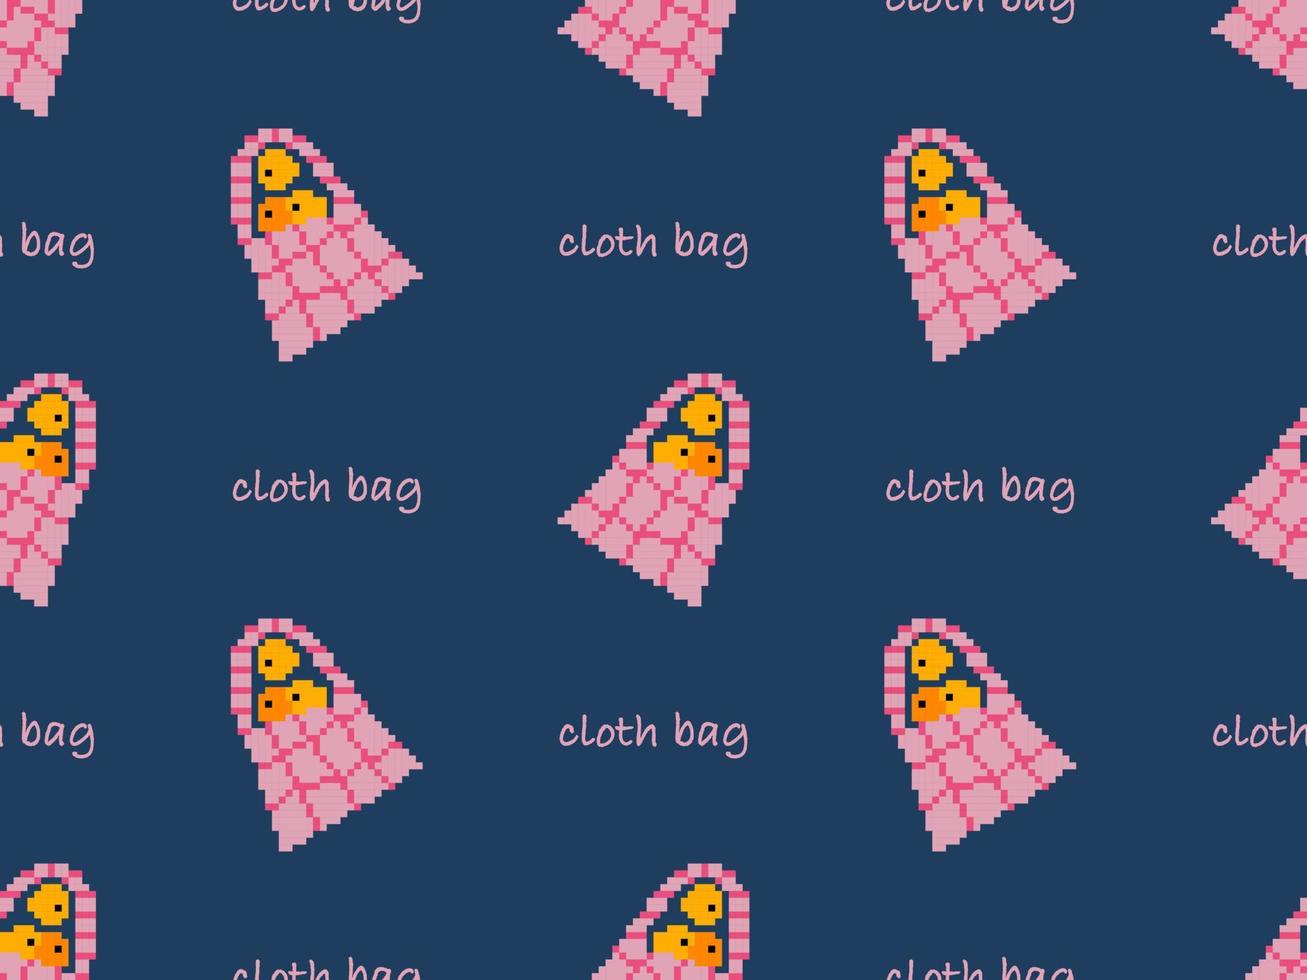 Cloth bag cartoon character seamless pattern on blue background. Pixel style vector